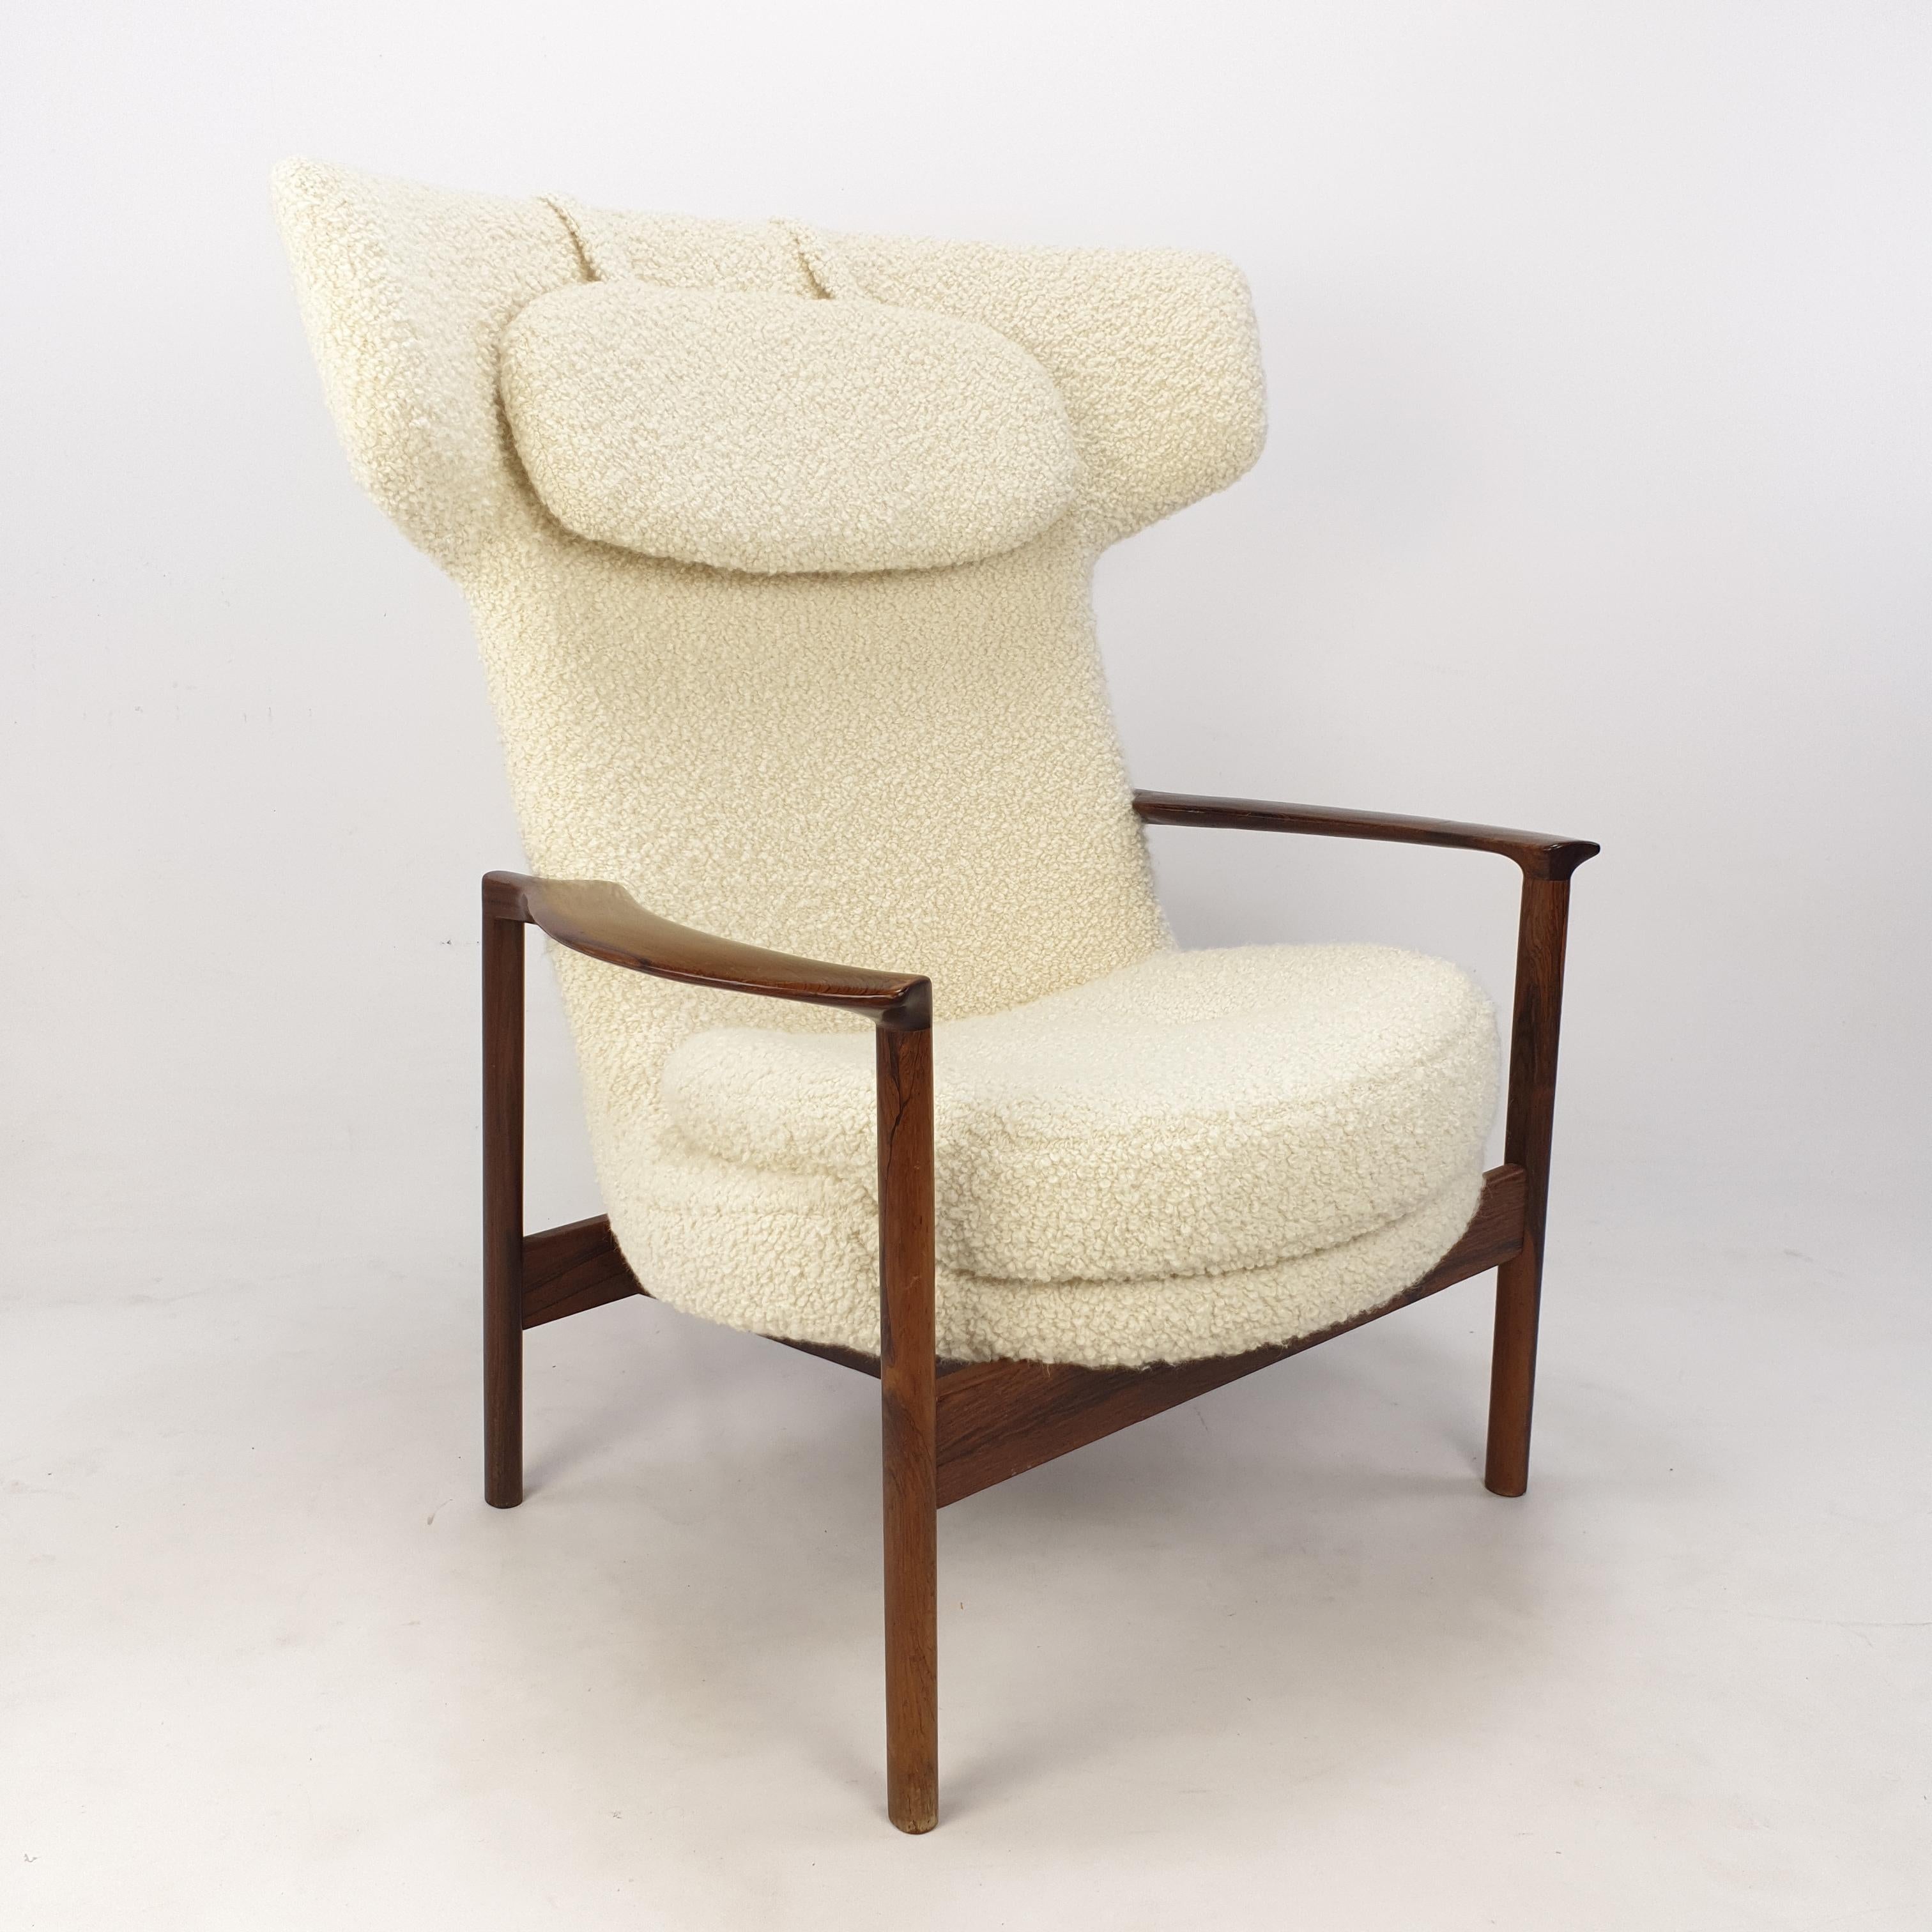 Stunning wing back lounge chair designed by Ib Kofod-Larsen and produced by Carlo Ghan Denmark, 1954. 

The frame is made of rosewood and has beautiful details.

The chair is just restored with new foam and new fabric.
It is reupholstered with